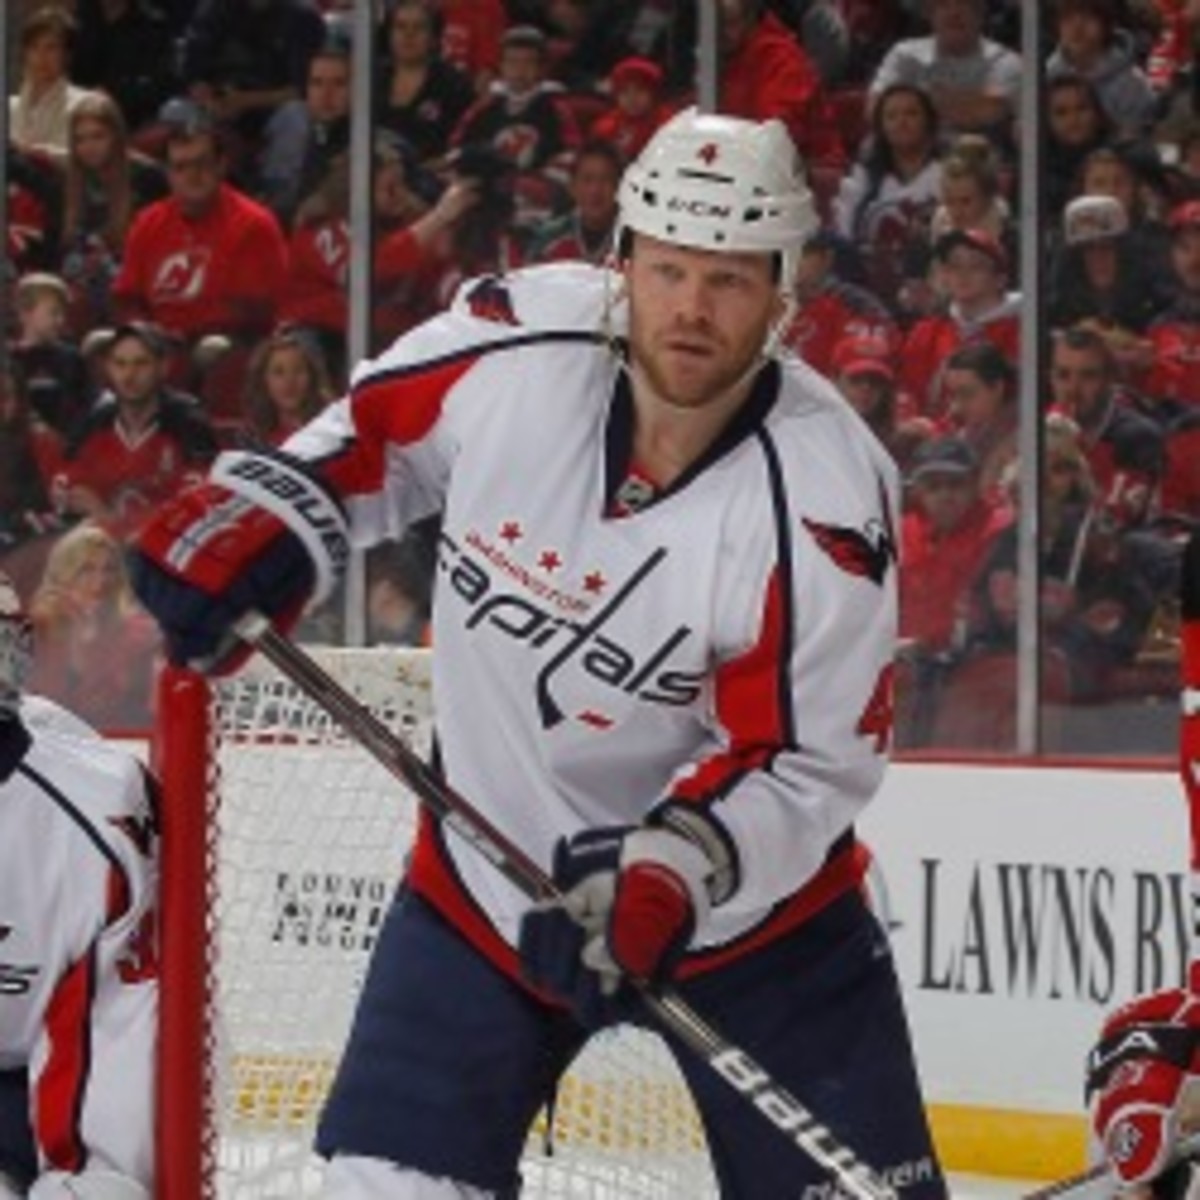 Capitals defenseman John Erkskine was suspended three games for elbowing. (Andy Marlin/NHL/Getty Images)